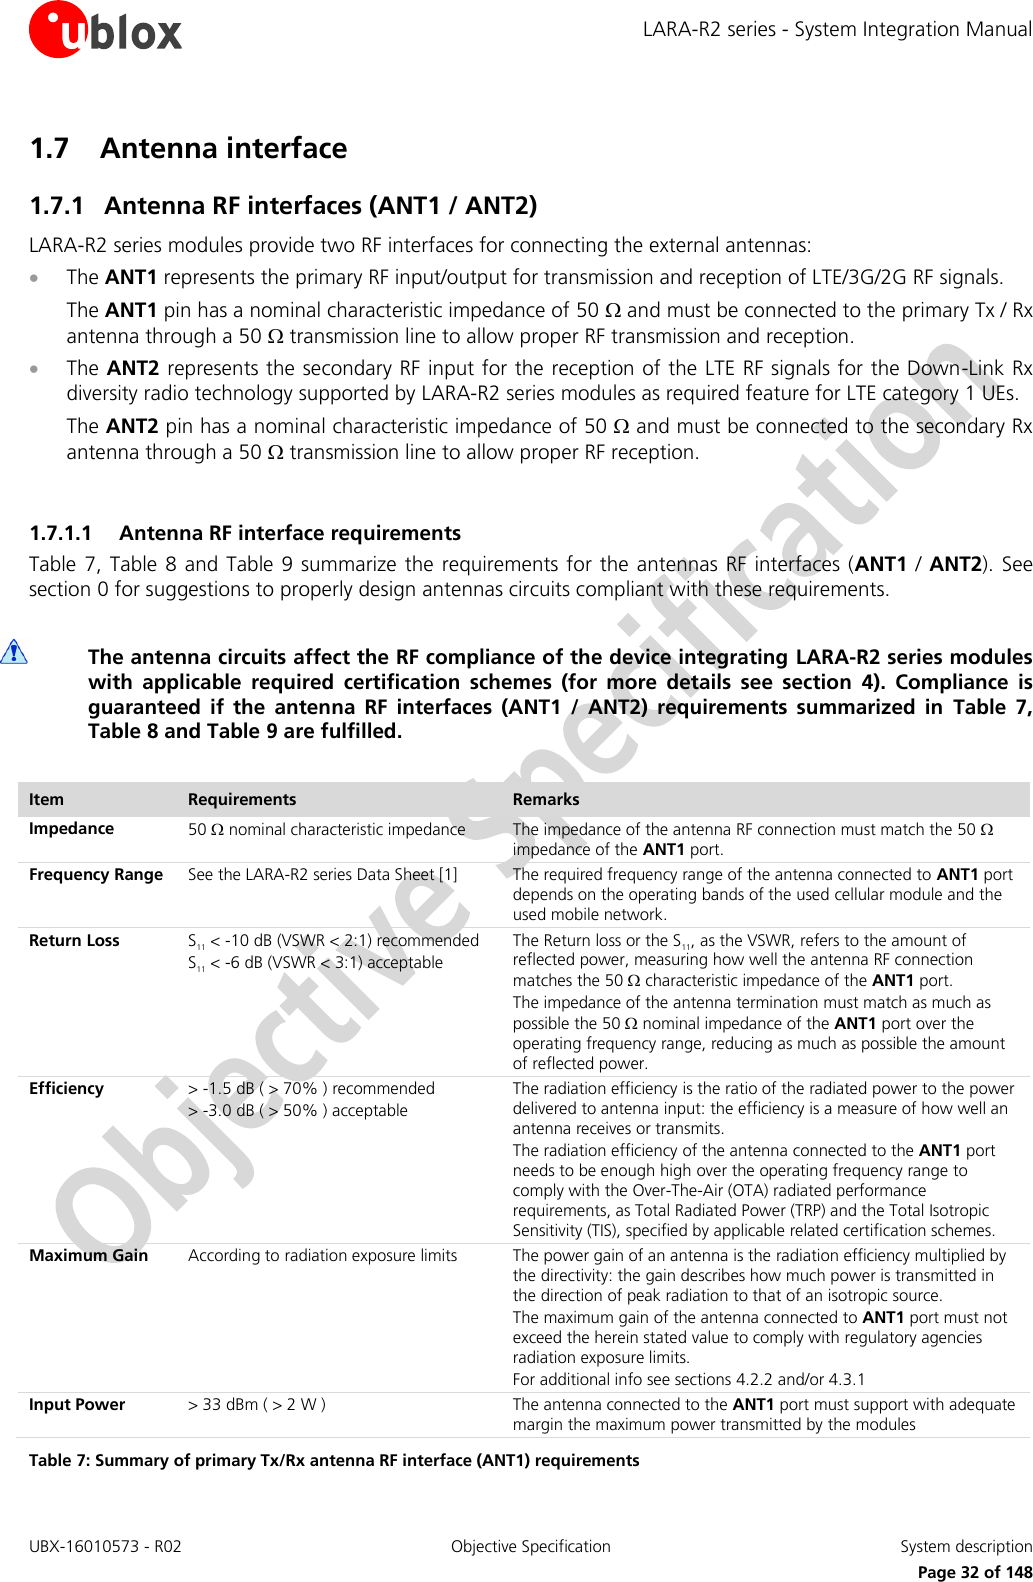 LARA-R2 series - System Integration Manual UBX-16010573 - R02  Objective Specification  System description     Page 32 of 148 1.7 Antenna interface 1.7.1 Antenna RF interfaces (ANT1 / ANT2) LARA-R2 series modules provide two RF interfaces for connecting the external antennas:  The ANT1 represents the primary RF input/output for transmission and reception of LTE/3G/2G RF signals.  The ANT1 pin has a nominal characteristic impedance of 50  and must be connected to the primary Tx / Rx antenna through a 50  transmission line to allow proper RF transmission and reception.  The ANT2 represents the secondary RF input for the reception of the LTE RF signals for the Down-Link Rx diversity radio technology supported by LARA-R2 series modules as required feature for LTE category 1 UEs.  The ANT2 pin has a nominal characteristic impedance of 50  and must be connected to the secondary Rx antenna through a 50  transmission line to allow proper RF reception.  1.7.1.1 Antenna RF interface requirements Table 7, Table 8 and Table 9 summarize  the requirements for  the antennas RF  interfaces (ANT1 /  ANT2).  See section 0 for suggestions to properly design antennas circuits compliant with these requirements.   The antenna circuits affect the RF compliance of the device integrating LARA-R2 series modules with  applicable  required  certification  schemes  (for  more  details  see  section  4).  Compliance  is guaranteed  if  the  antenna  RF  interfaces  (ANT1  /  ANT2)  requirements  summarized  in  Table  7, Table 8 and Table 9 are fulfilled.  Item Requirements Remarks Impedance  50  nominal characteristic impedance The impedance of the antenna RF connection must match the 50  impedance of the ANT1 port. Frequency Range See the LARA-R2 series Data Sheet [1]  The required frequency range of the antenna connected to ANT1 port depends on the operating bands of the used cellular module and the used mobile network. Return Loss S11 &lt; -10 dB (VSWR &lt; 2:1) recommended S11 &lt; -6 dB (VSWR &lt; 3:1) acceptable The Return loss or the S11, as the VSWR, refers to the amount of reflected power, measuring how well the antenna RF connection matches the 50  characteristic impedance of the ANT1 port. The impedance of the antenna termination must match as much as possible the 50  nominal impedance of the ANT1 port over the operating frequency range, reducing as much as possible the amount of reflected power. Efficiency &gt; -1.5 dB ( &gt; 70% ) recommended &gt; -3.0 dB ( &gt; 50% ) acceptable The radiation efficiency is the ratio of the radiated power to the power delivered to antenna input: the efficiency is a measure of how well an antenna receives or transmits. The radiation efficiency of the antenna connected to the ANT1 port needs to be enough high over the operating frequency range to comply with the Over-The-Air (OTA) radiated performance requirements, as Total Radiated Power (TRP) and the Total Isotropic Sensitivity (TIS), specified by applicable related certification schemes. Maximum Gain  According to radiation exposure limits The power gain of an antenna is the radiation efficiency multiplied by the directivity: the gain describes how much power is transmitted in the direction of peak radiation to that of an isotropic source.  The maximum gain of the antenna connected to ANT1 port must not exceed the herein stated value to comply with regulatory agencies radiation exposure limits. For additional info see sections 4.2.2 and/or 4.3.1 Input Power  &gt; 33 dBm ( &gt; 2 W ) The antenna connected to the ANT1 port must support with adequate margin the maximum power transmitted by the modules Table 7: Summary of primary Tx/Rx antenna RF interface (ANT1) requirements 